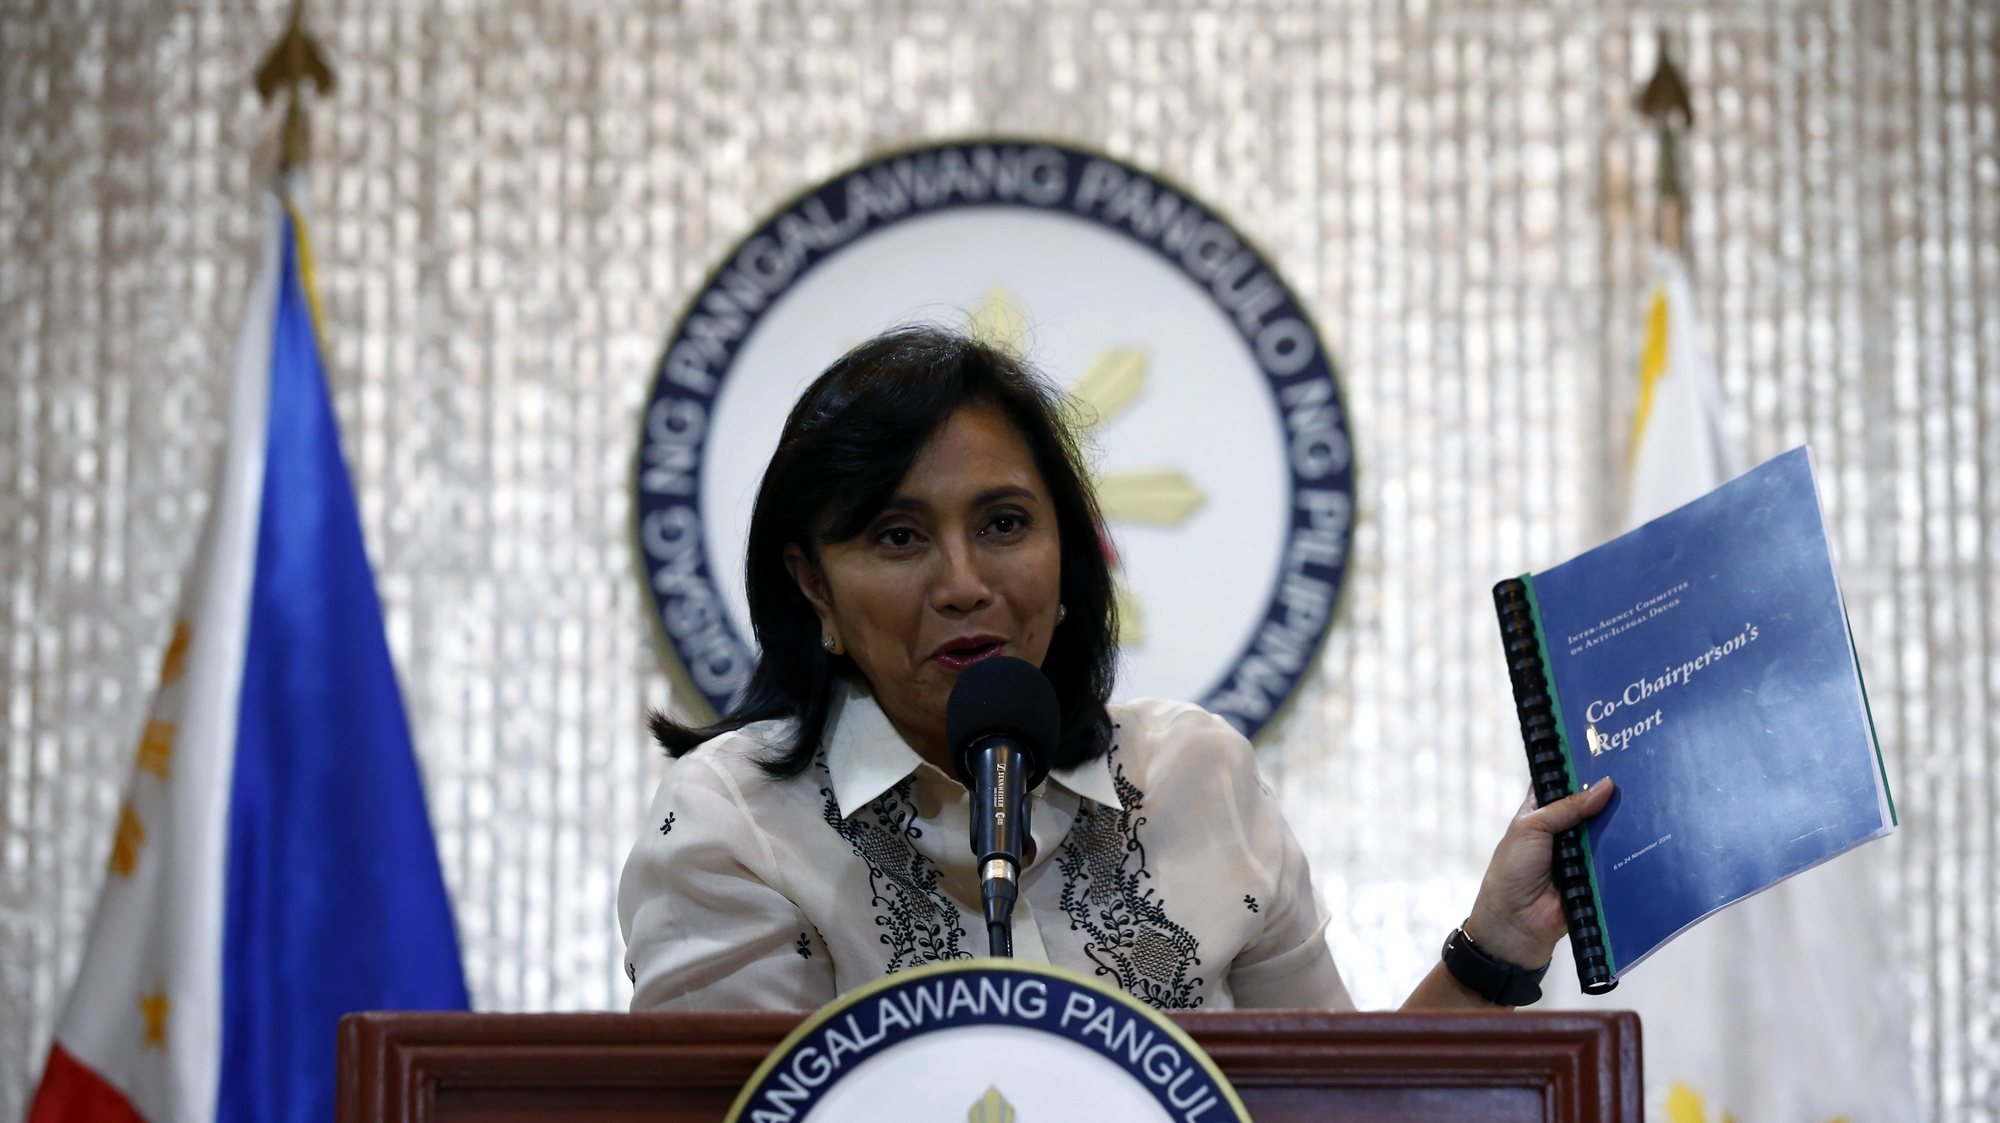 epa08074764 Philippine Vice President Leni Robredo shows a copy of her report, which was compiled from her short stint as co-chair of the country&#039;s Inter-Agency Committee on Anti-Illegal Drugs, at a press conference in Quezon City, Philippines, 16 December 2019. Robredo, who was barely a month into the position of co-chair when President Rodrigo Duterte removed her, deferred releasing details of her report on the country&#039;s illegal drugs situation and instead called for unity in helping people affected by the 6.9-magnitude earthquake that hit parts of the southern Philippines on 15 December.  EPA/ROLEX DELA PENA